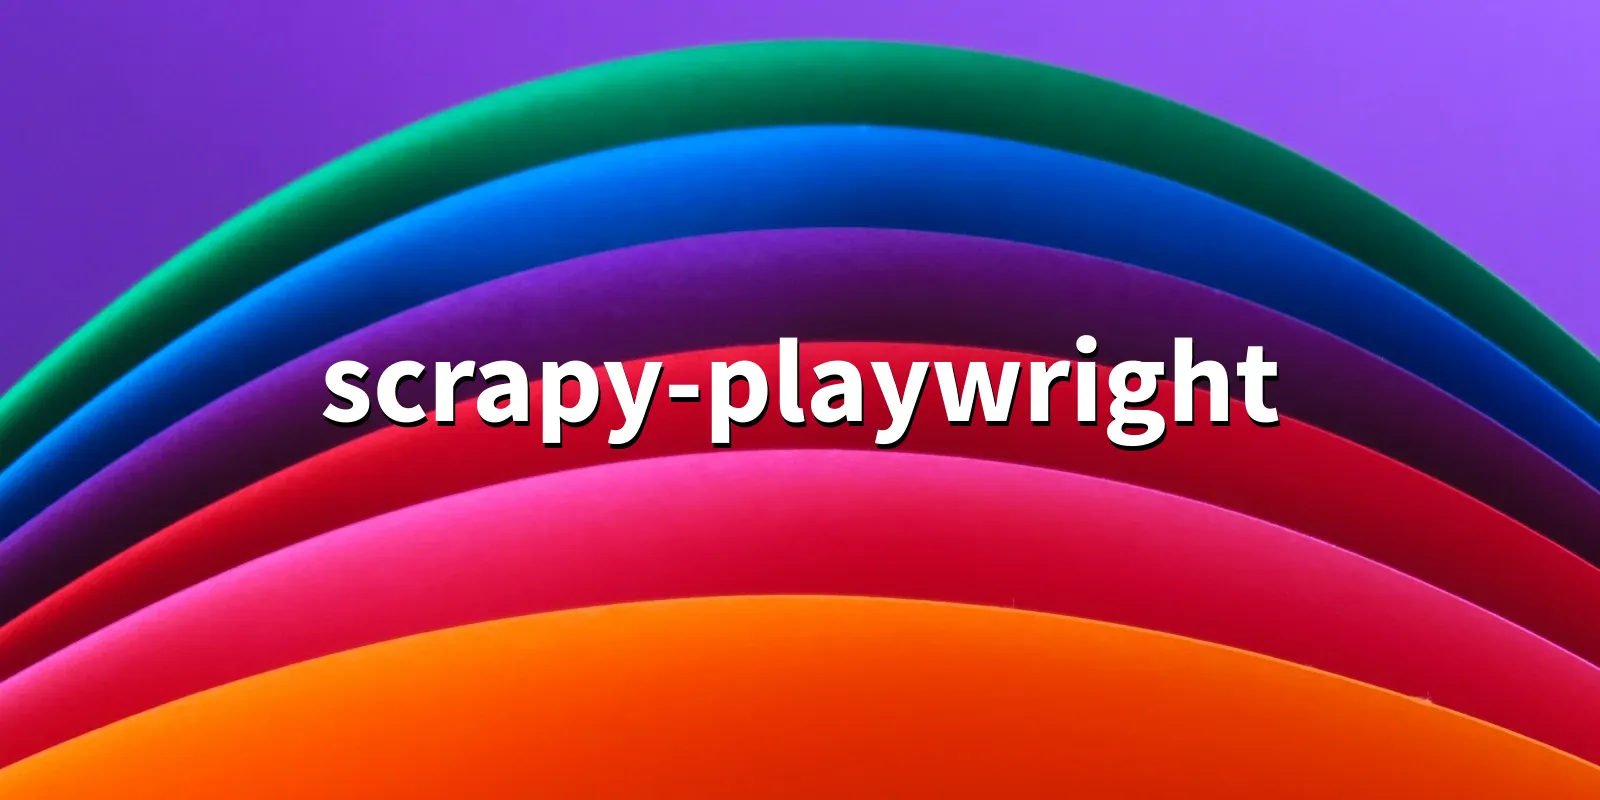 /pkg/s/scrapy-playwright/scrapy-playwright-banner.webp